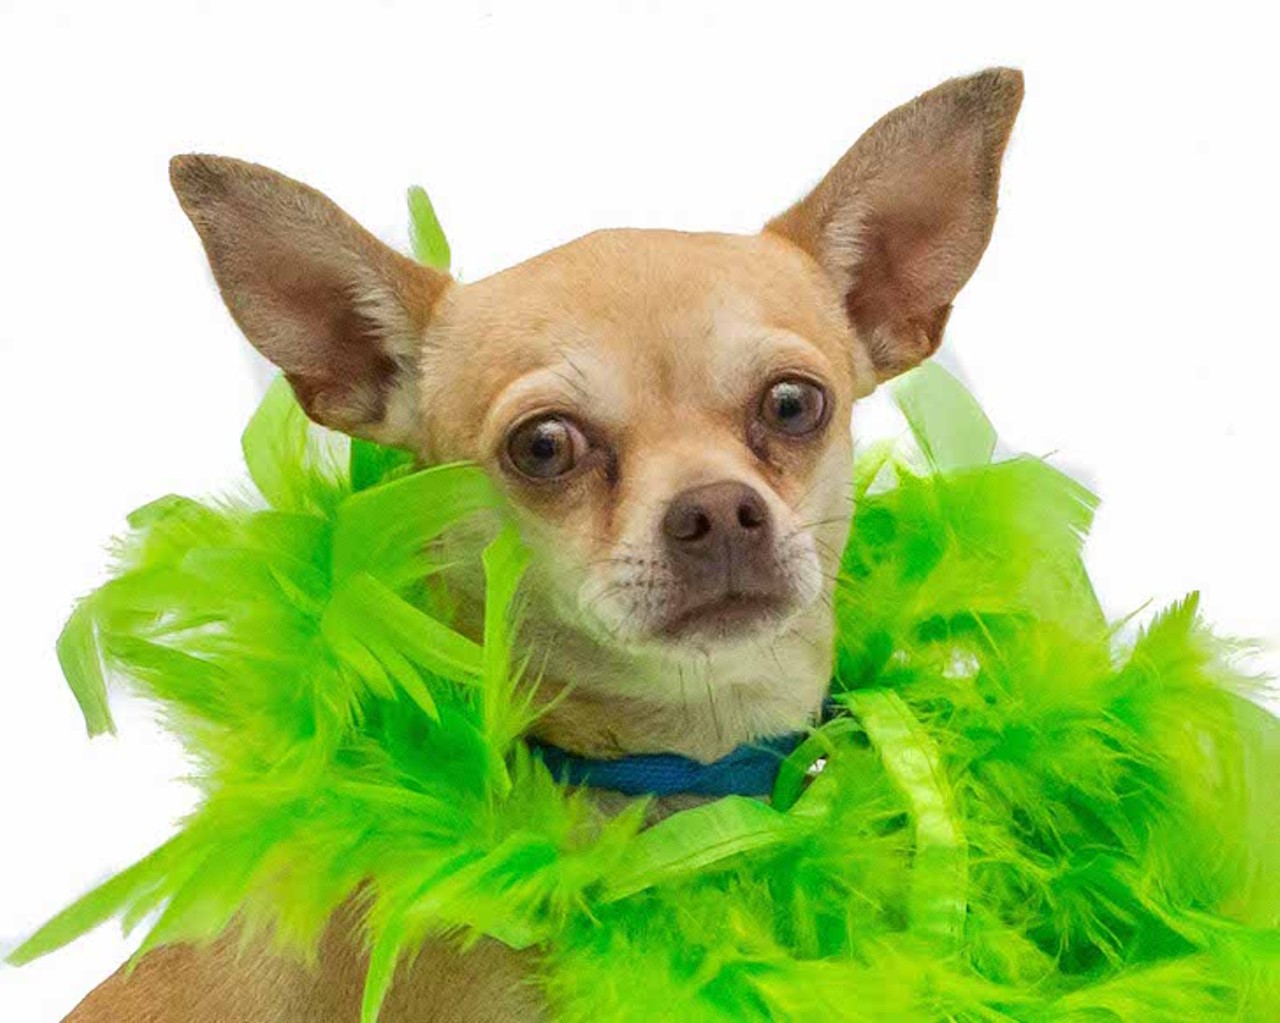 17 adoptable dogs looking for a little luck o' the Irish